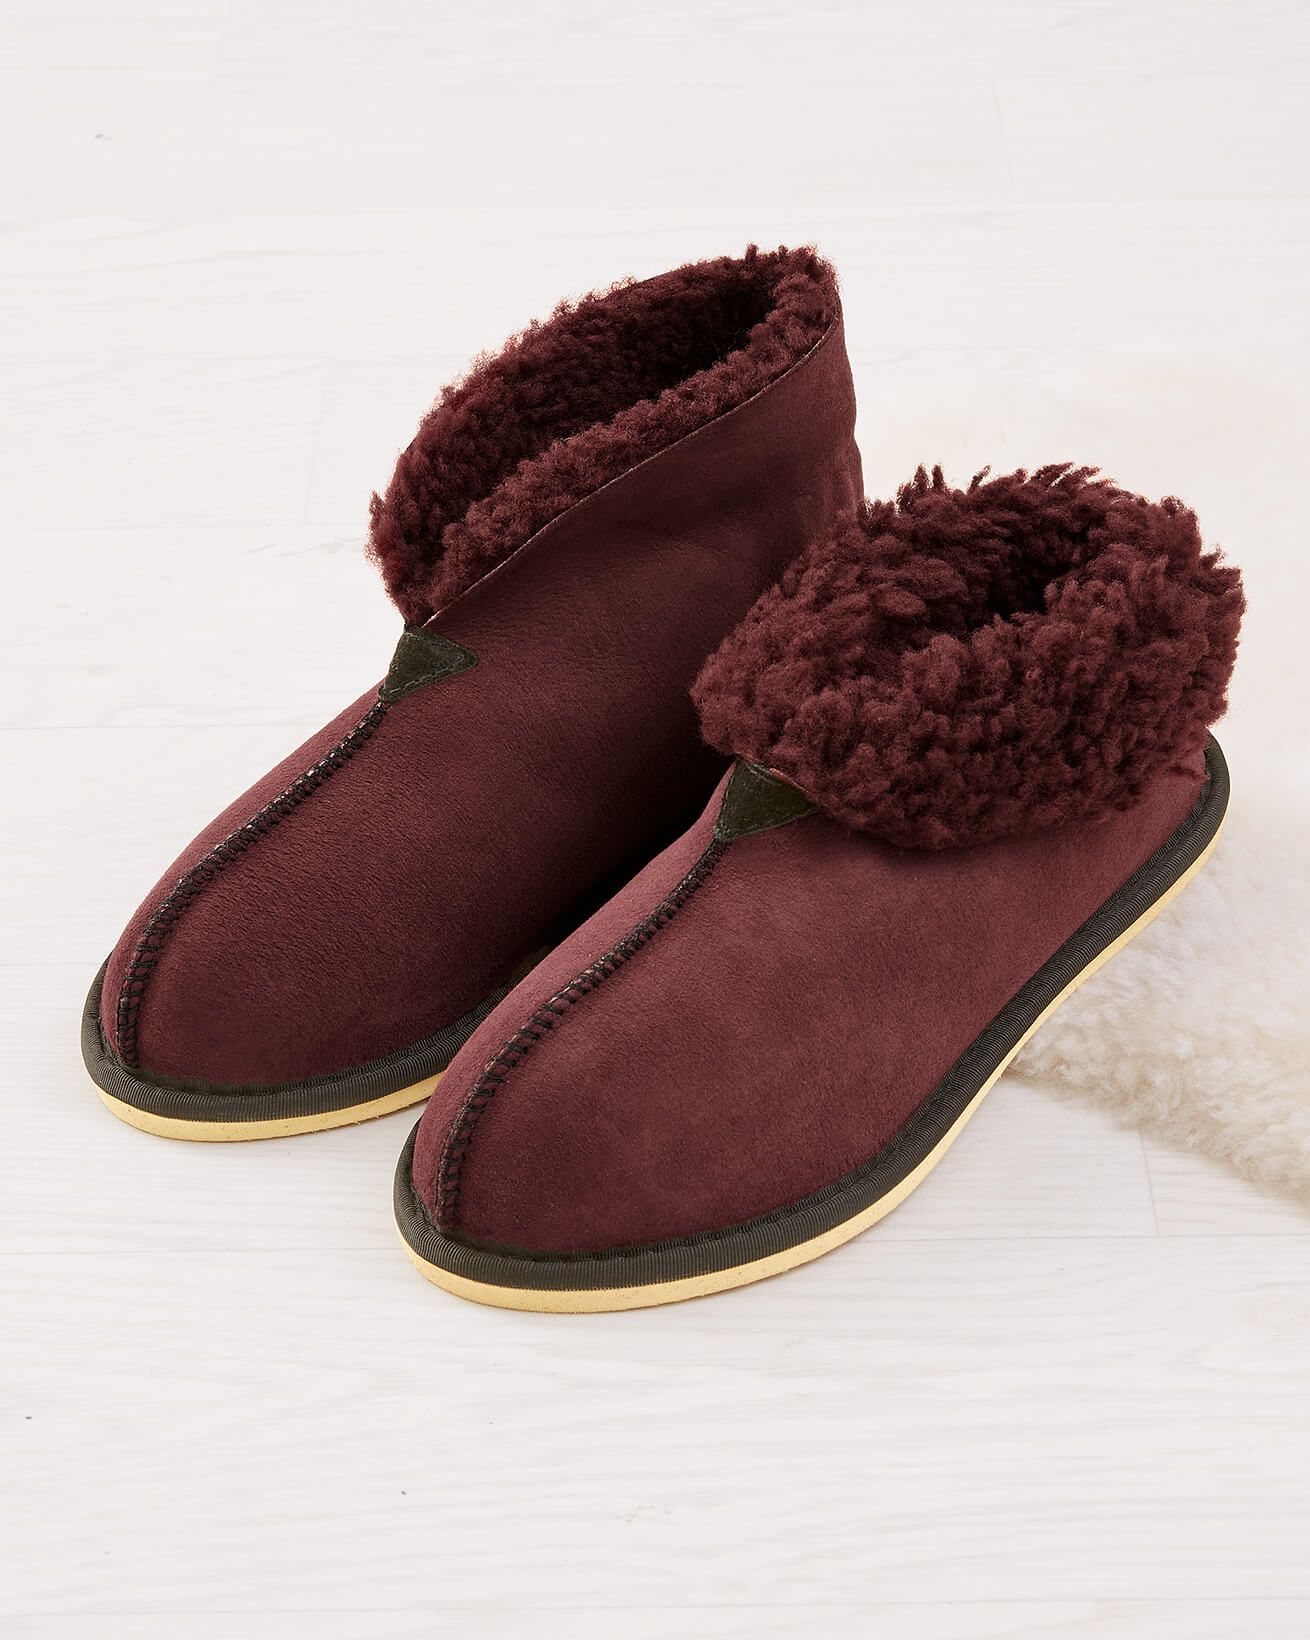 Women's Shearling Bootee Slippers